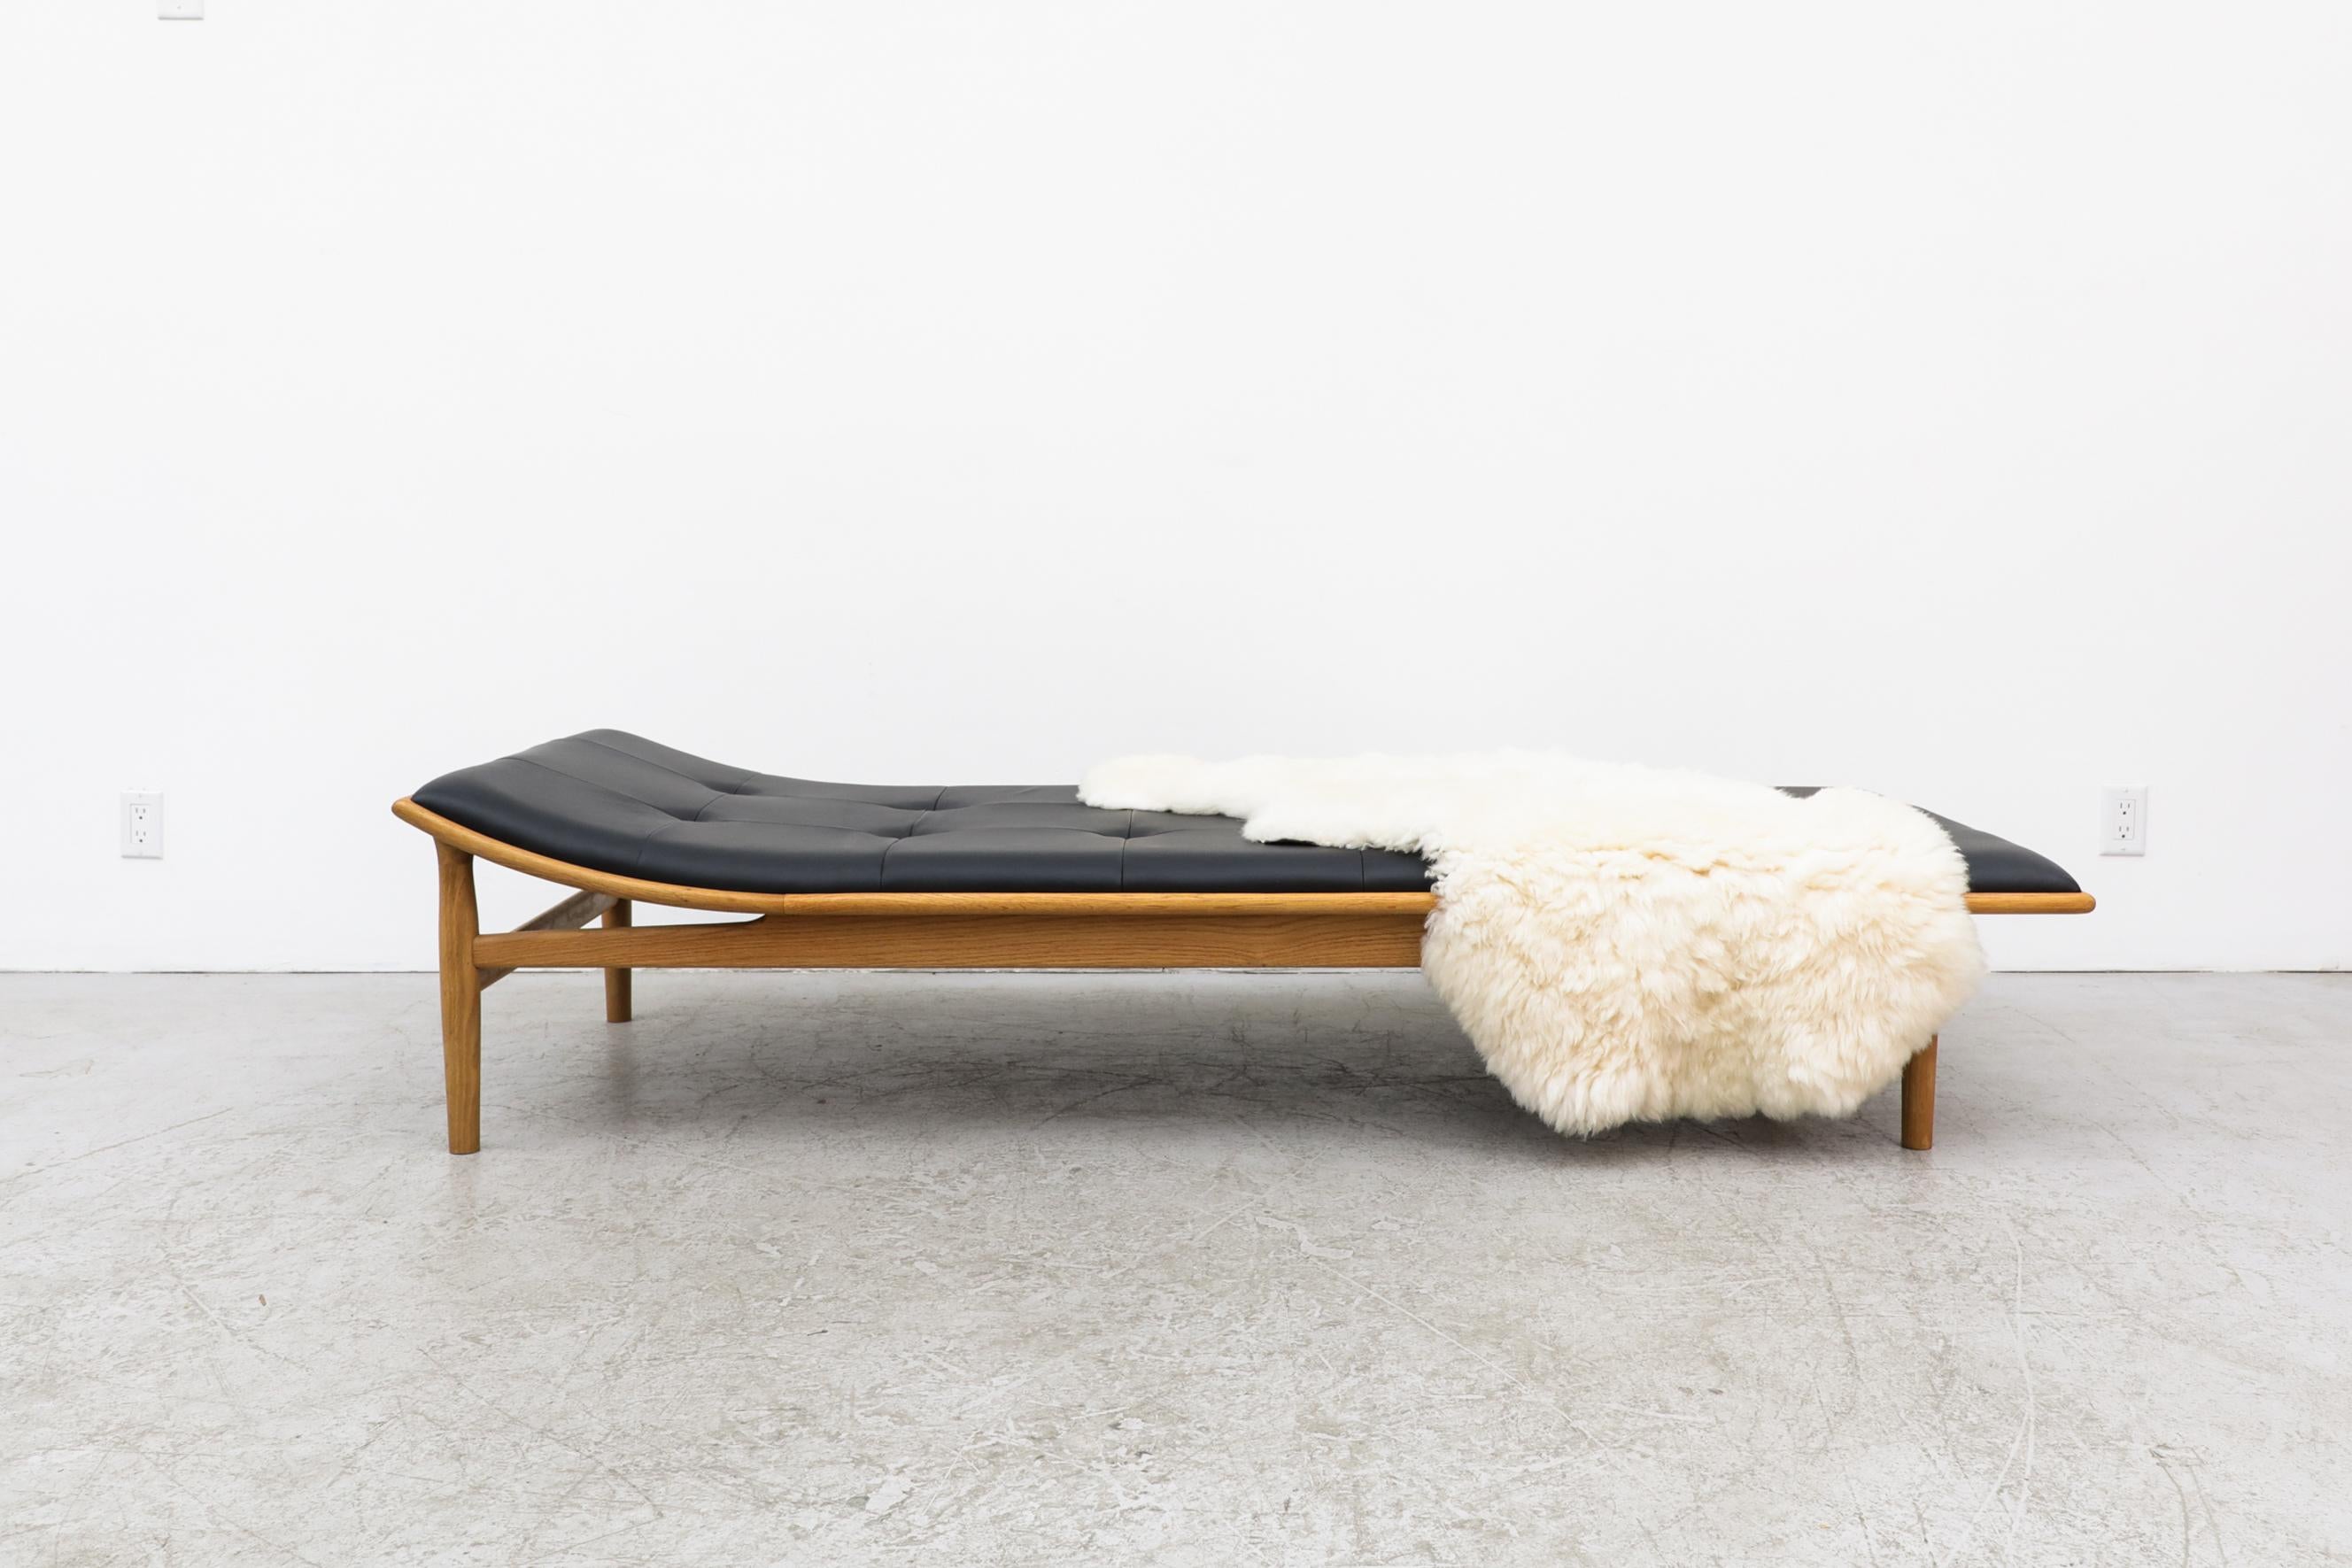 Kurt Østervig re-issue Model 311 oak daybed designed in the 1950s. A sleek wooden frame with a thin tufted black leather upholstered cushion. In good original condition with minimal wear, consistent with its age and use. Retains makers label. Three